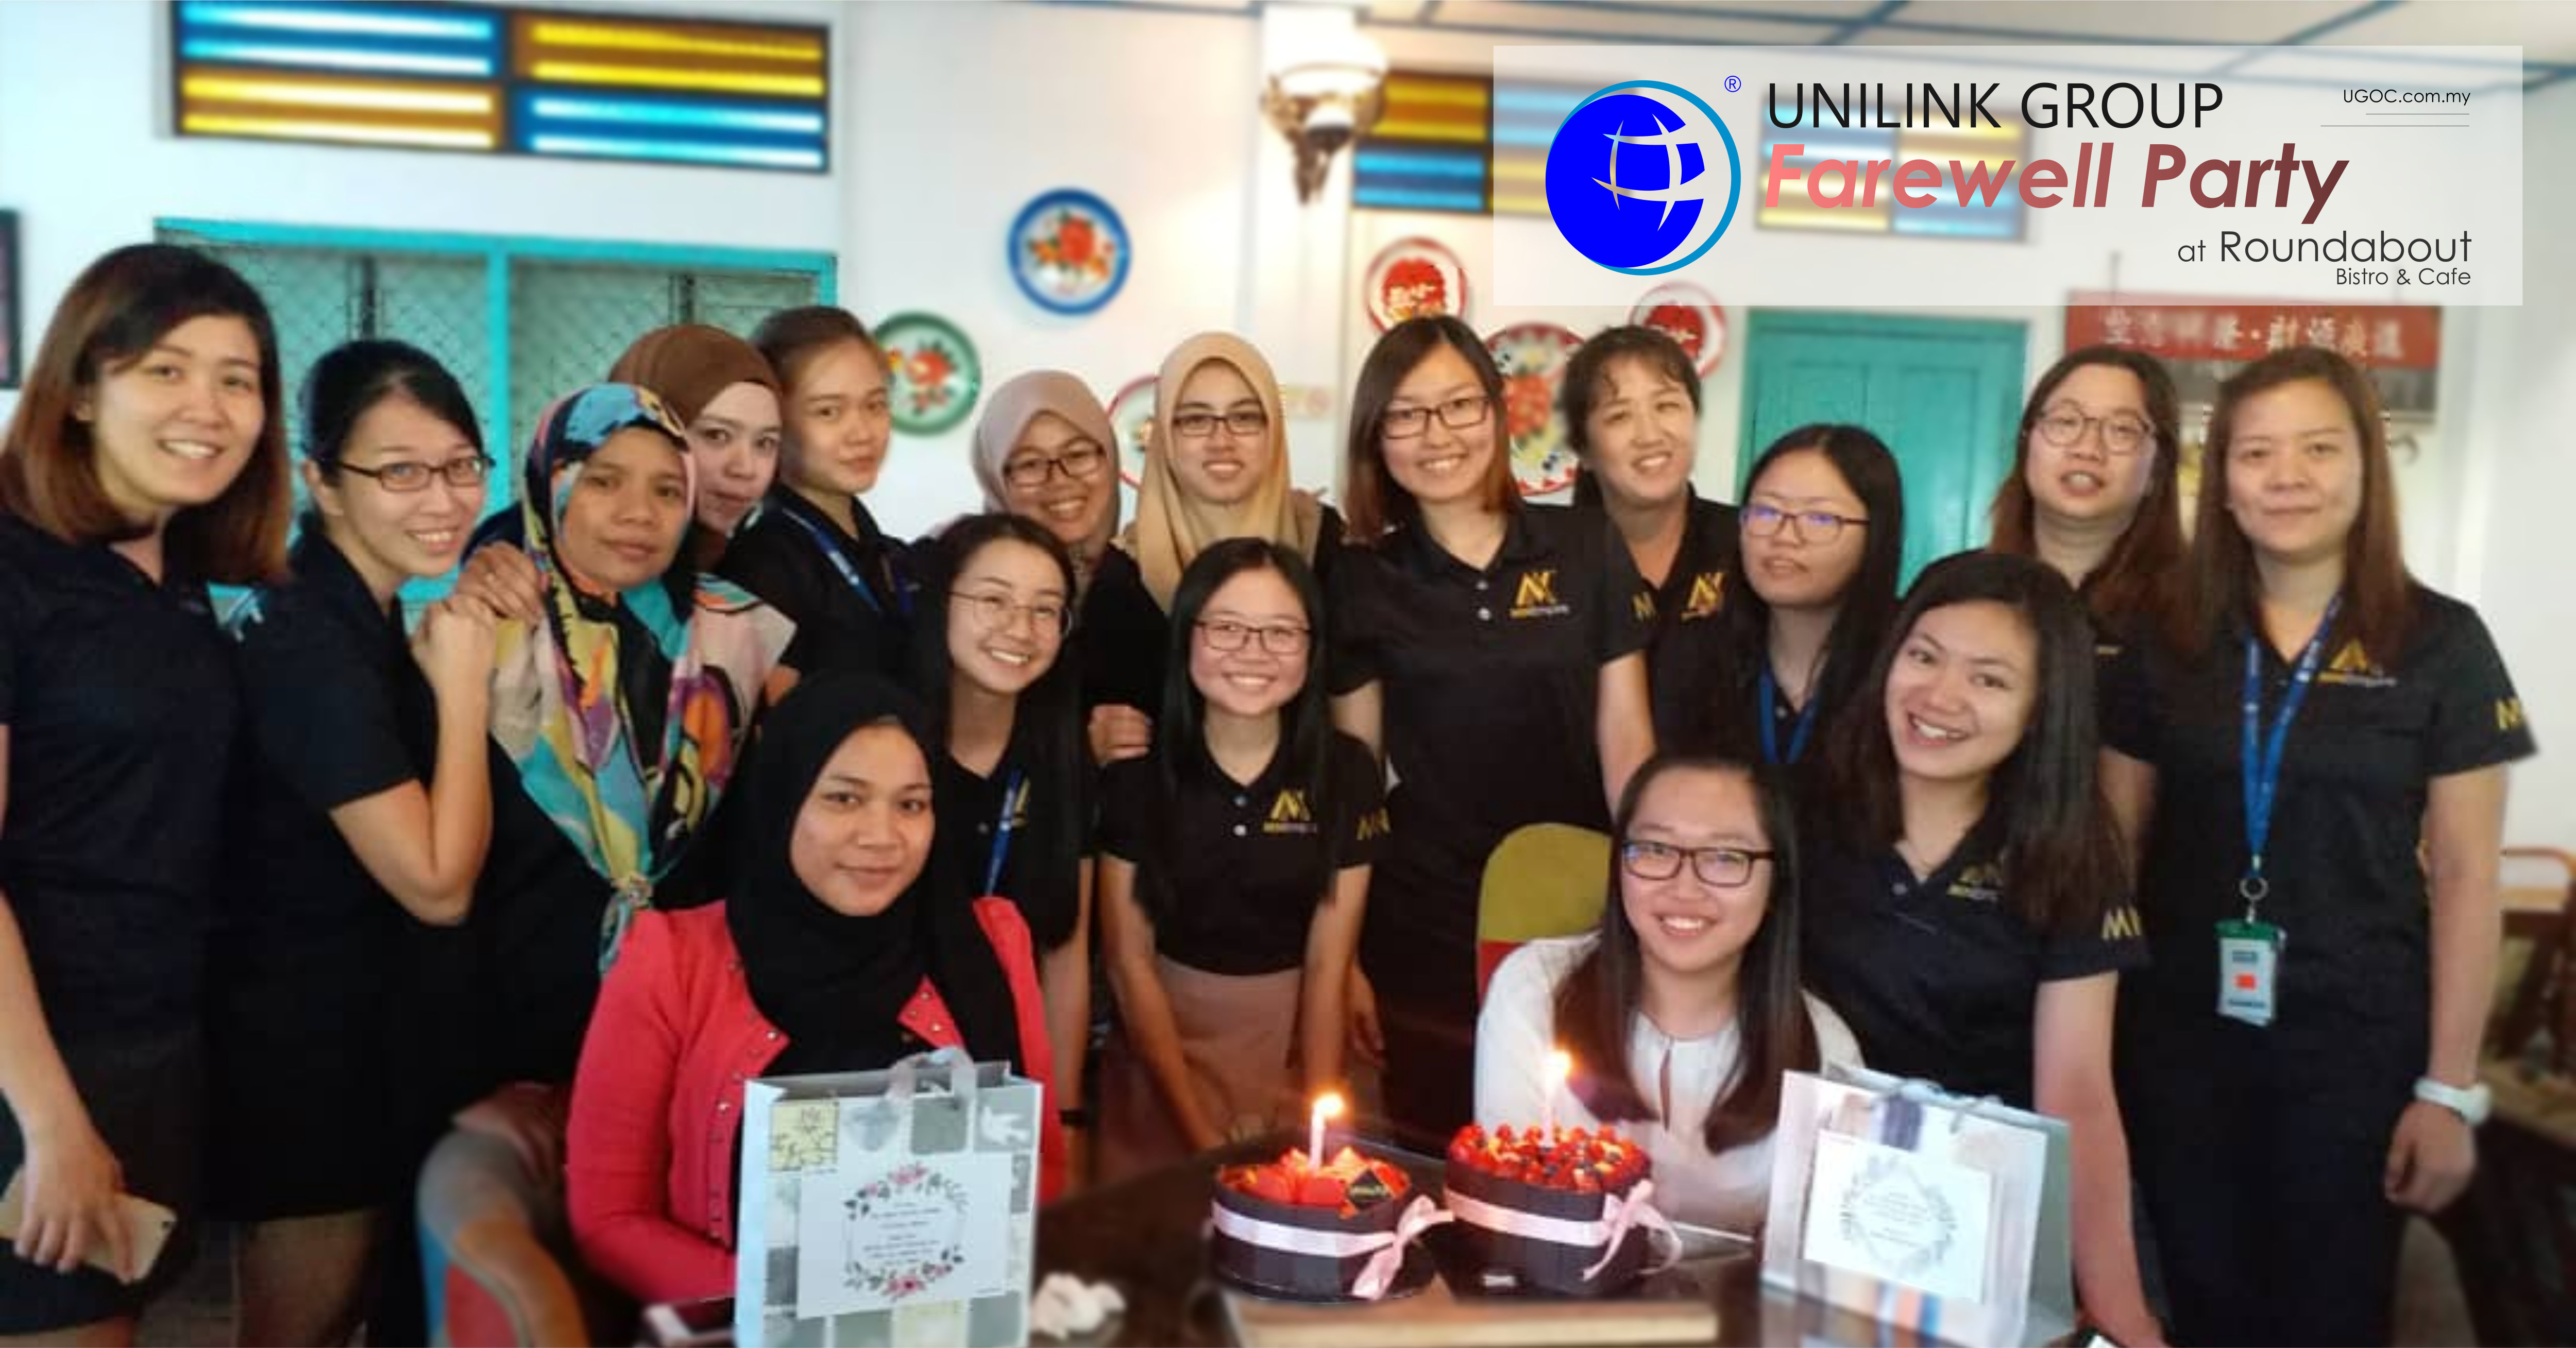 Unilink Group Farewell Party for Ms Rina and Ms JingLing from Agensi Pekerjaan Unilink Prospects Sdn Bhd at Roundabout Bistro and Cafe 00